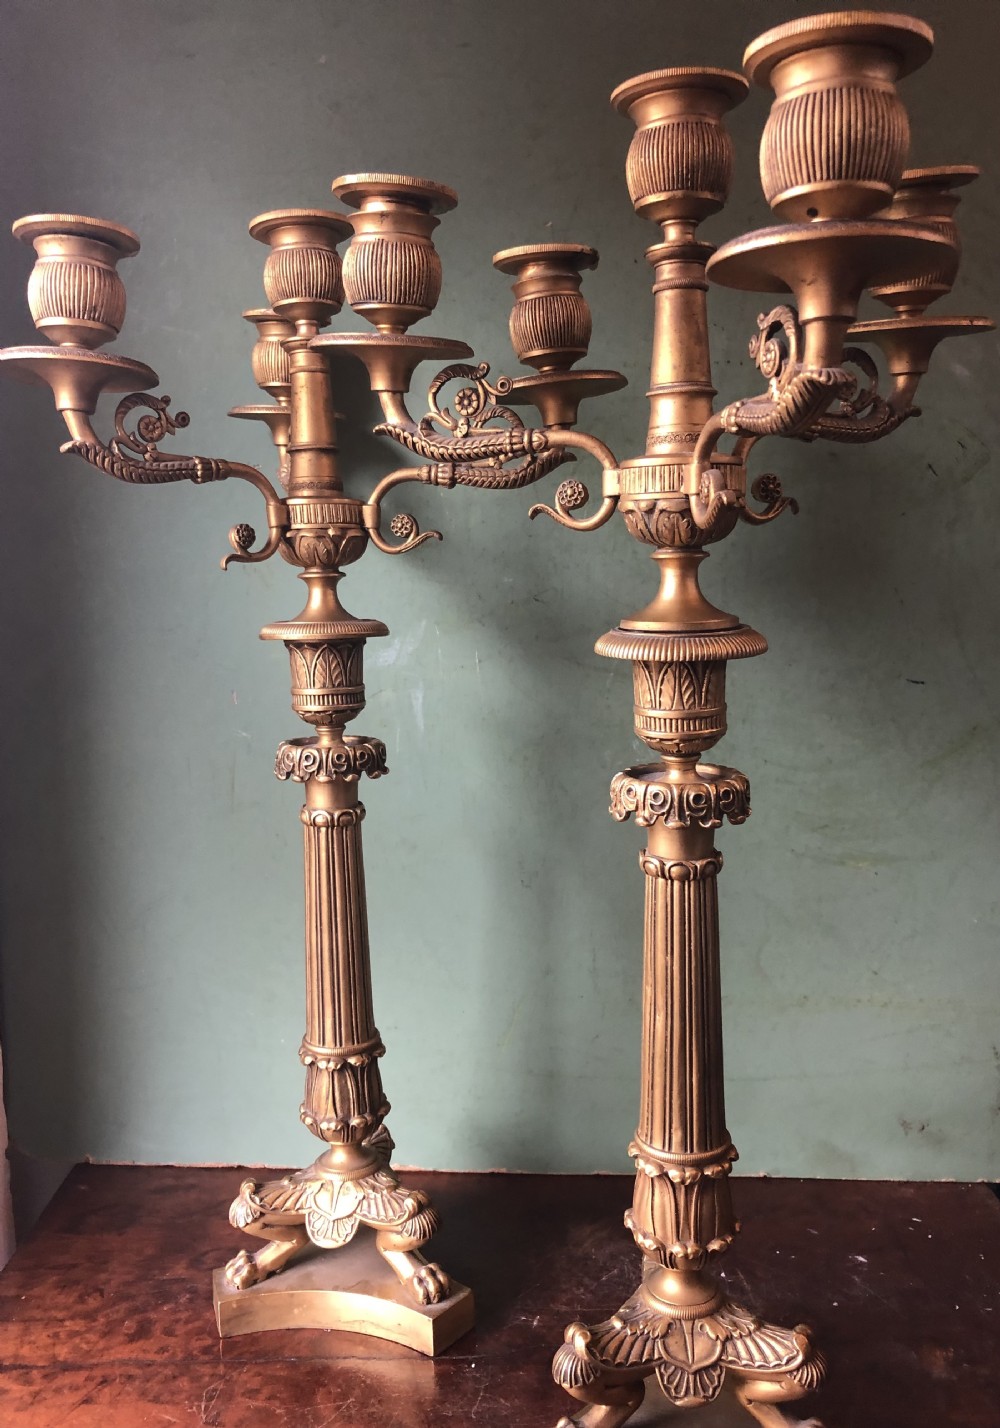 pair of early c19th french charles x period ormolu bronze candelabras